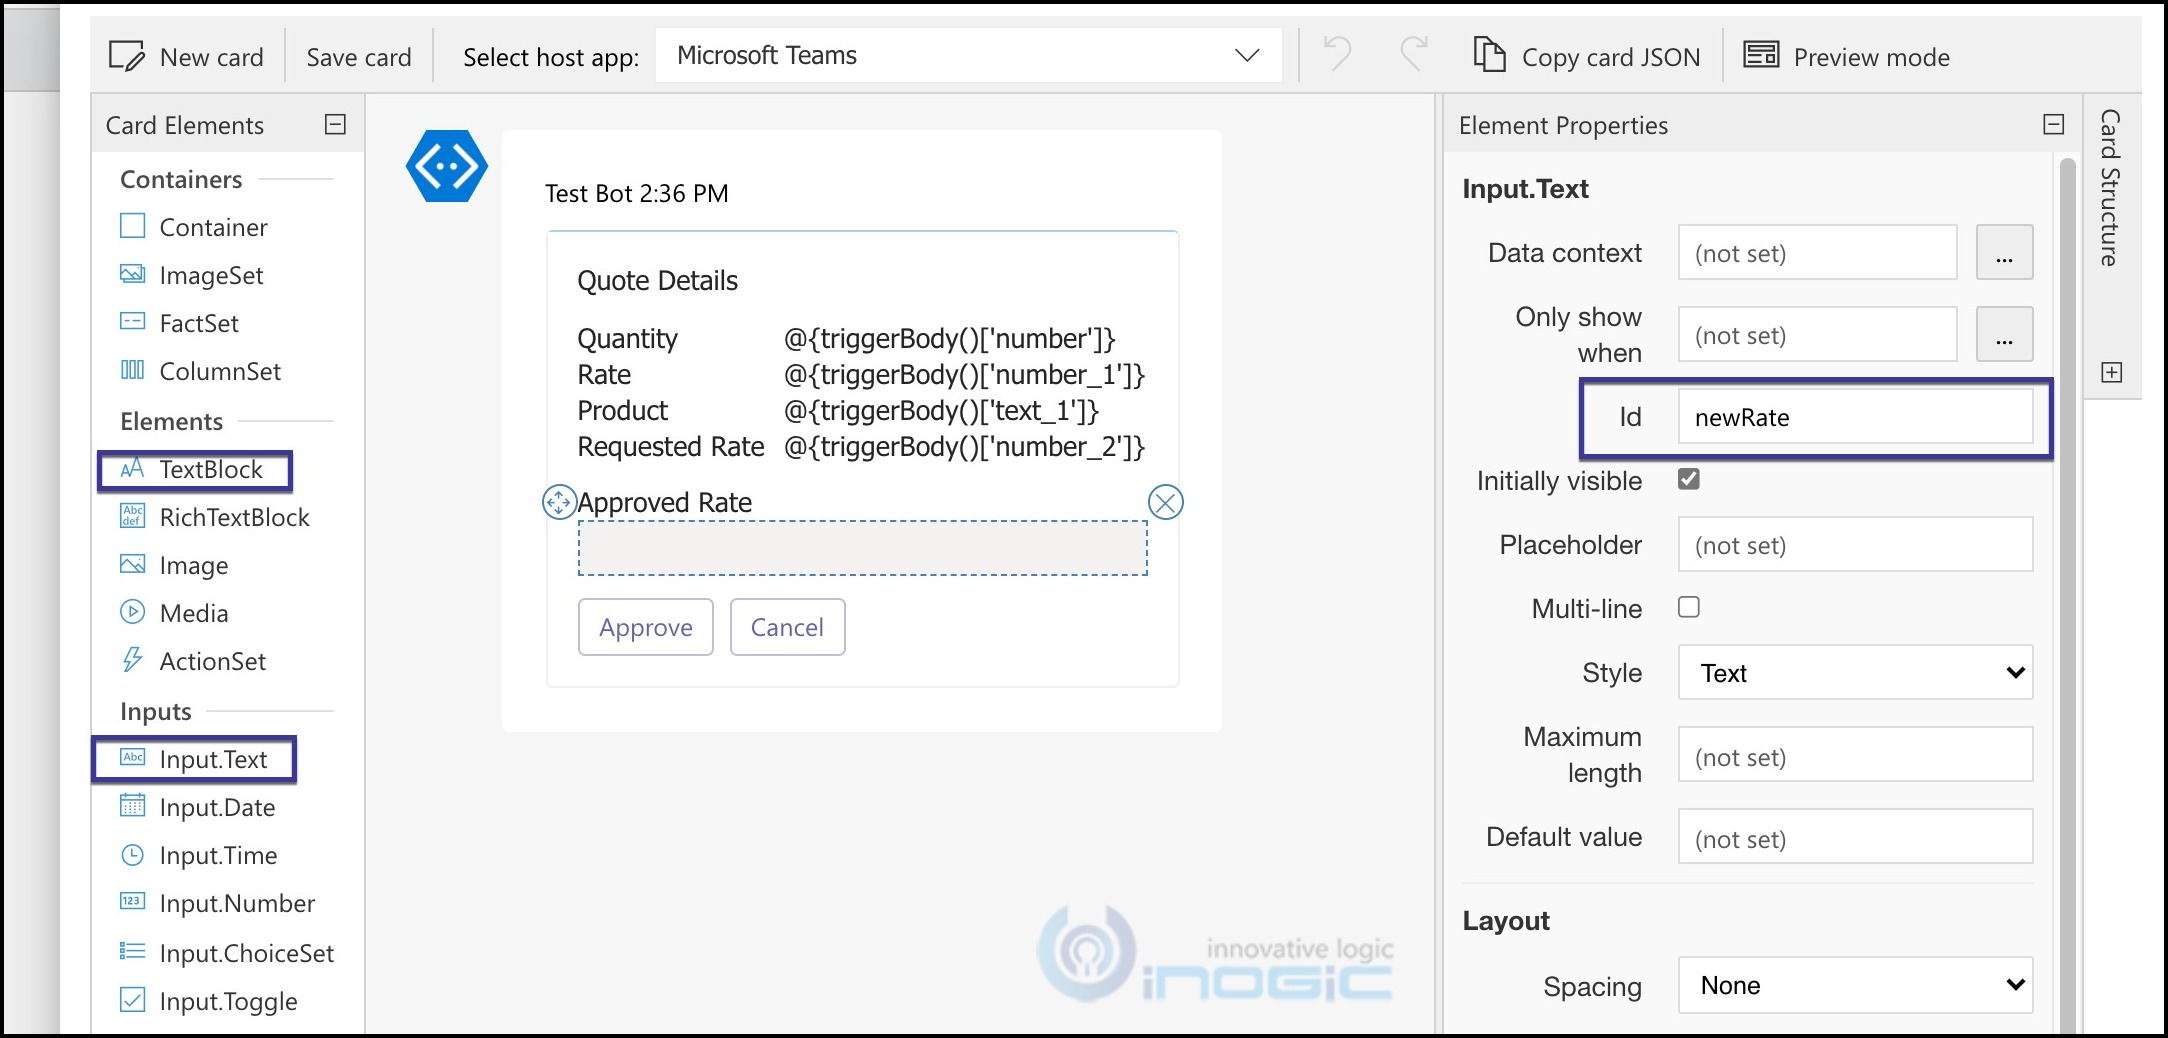 Actionable messages in MicrosoftTeams with Adaptive Cards